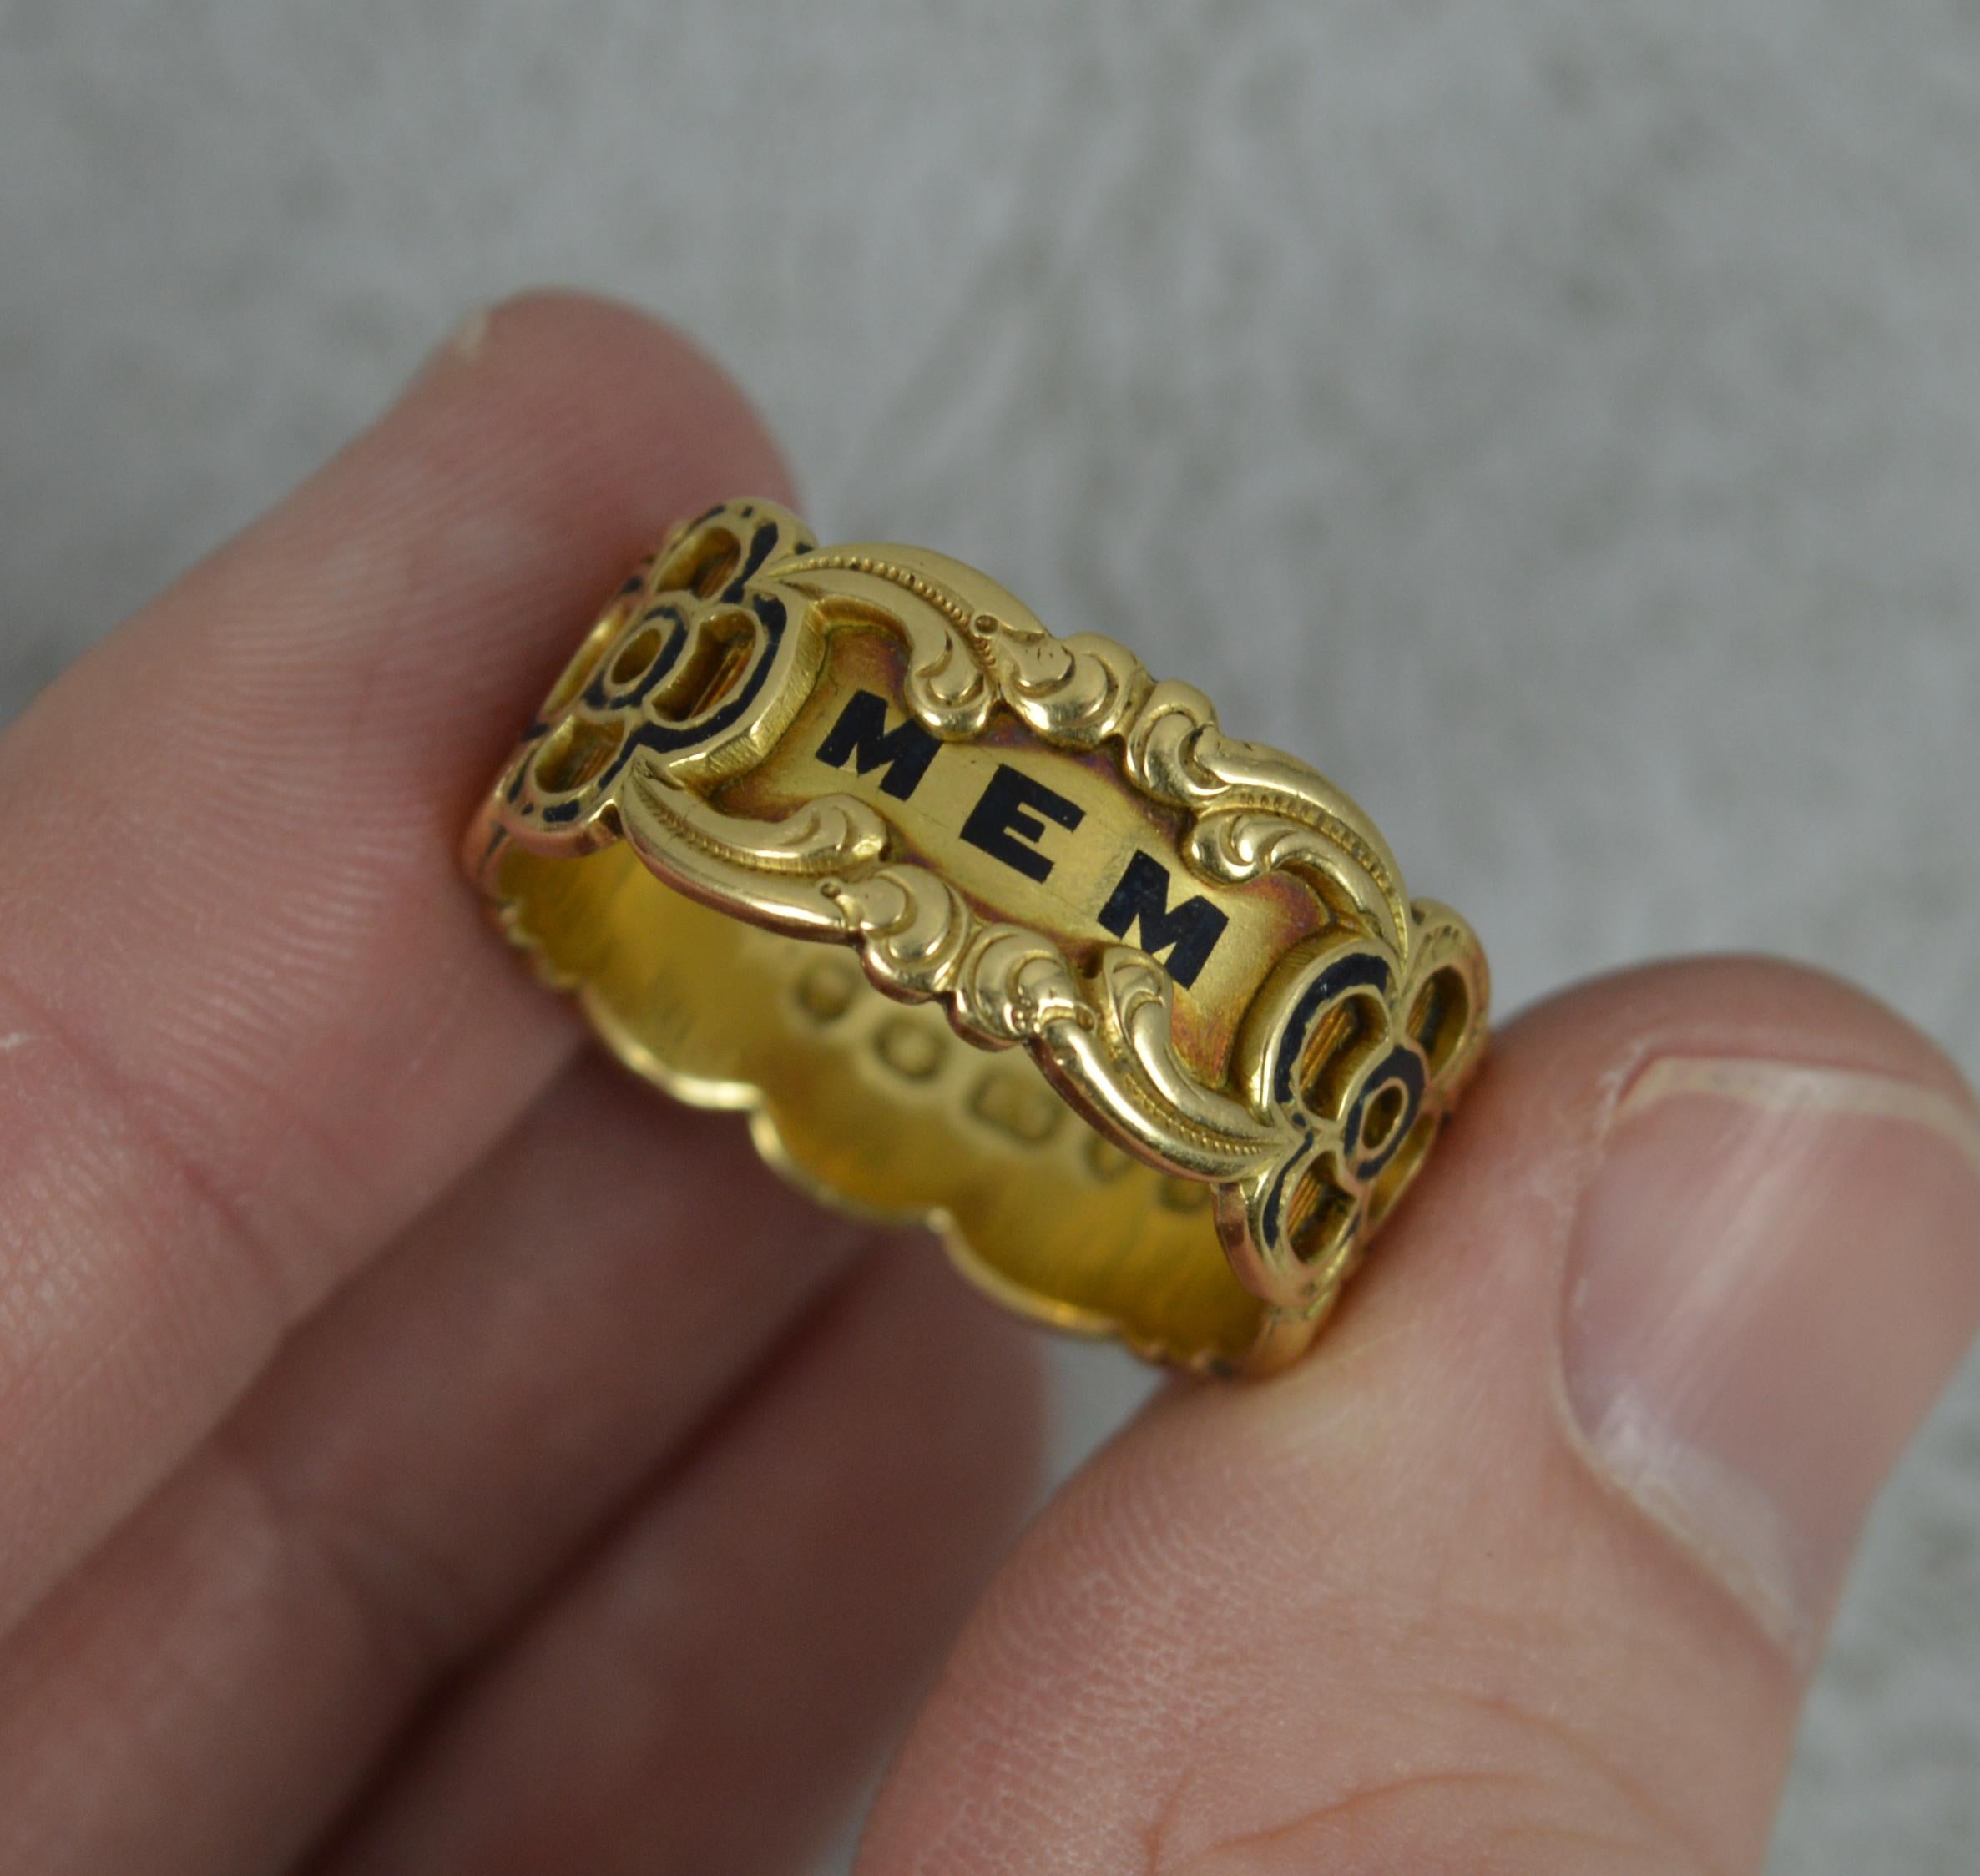 1842 Victorian 18 Carat Gold Enamel In Memory of Mourning Band Ring 5